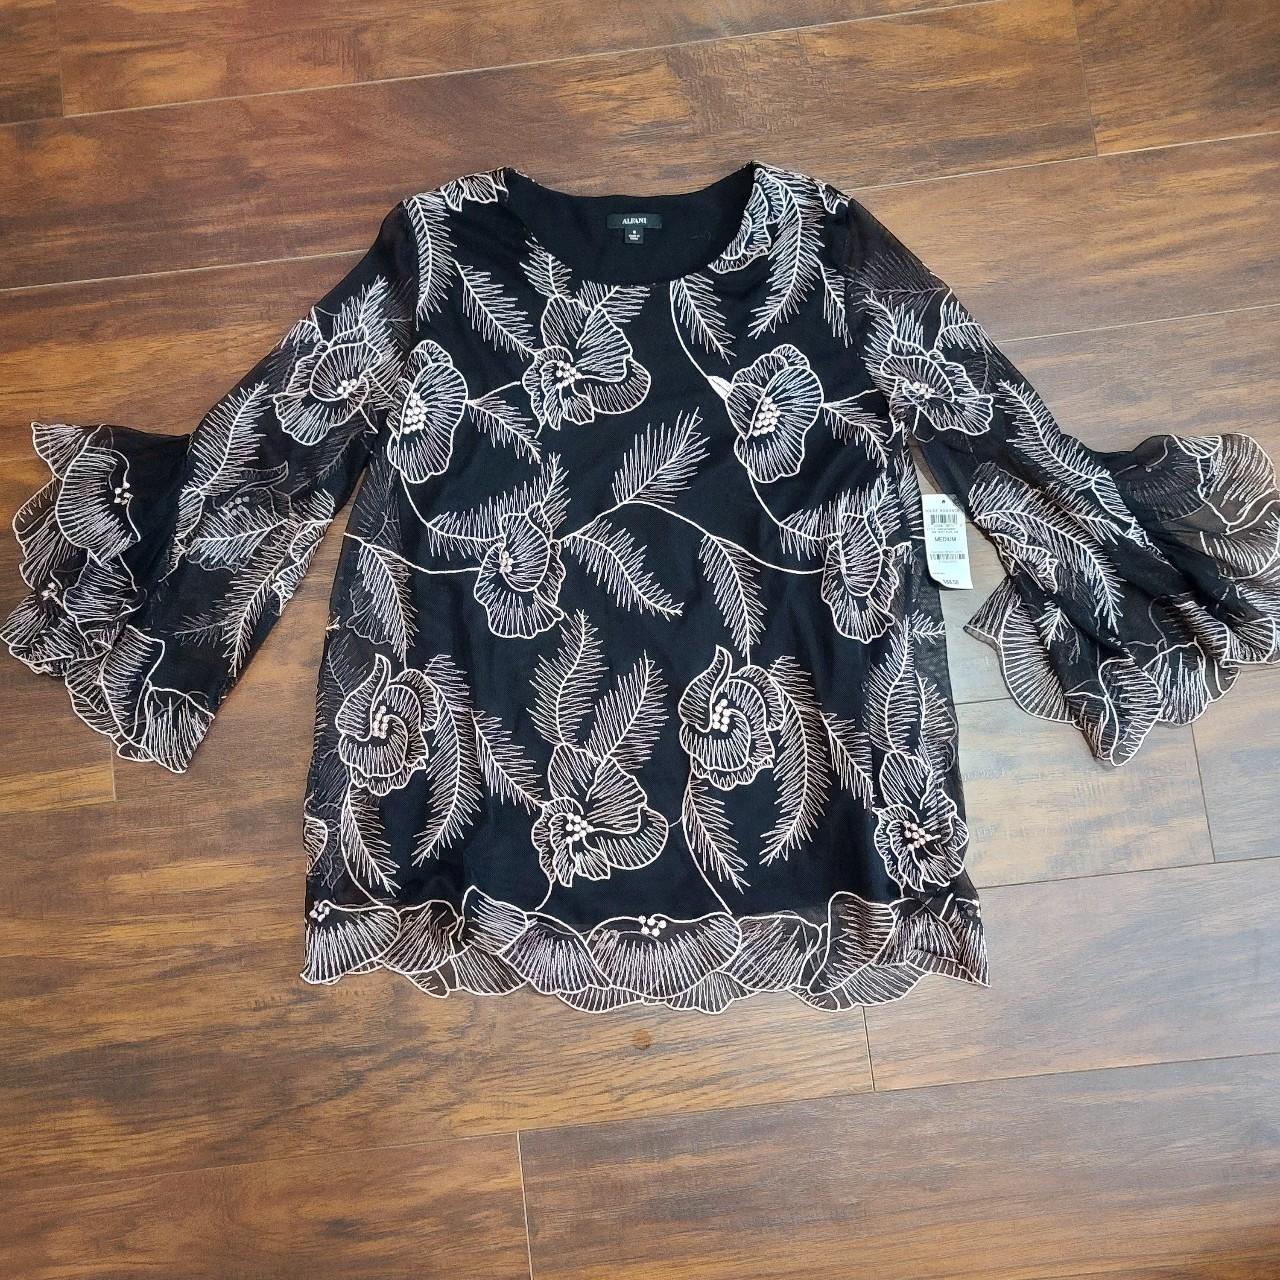 Macy's Women's Black and Pink Blouse | Depop